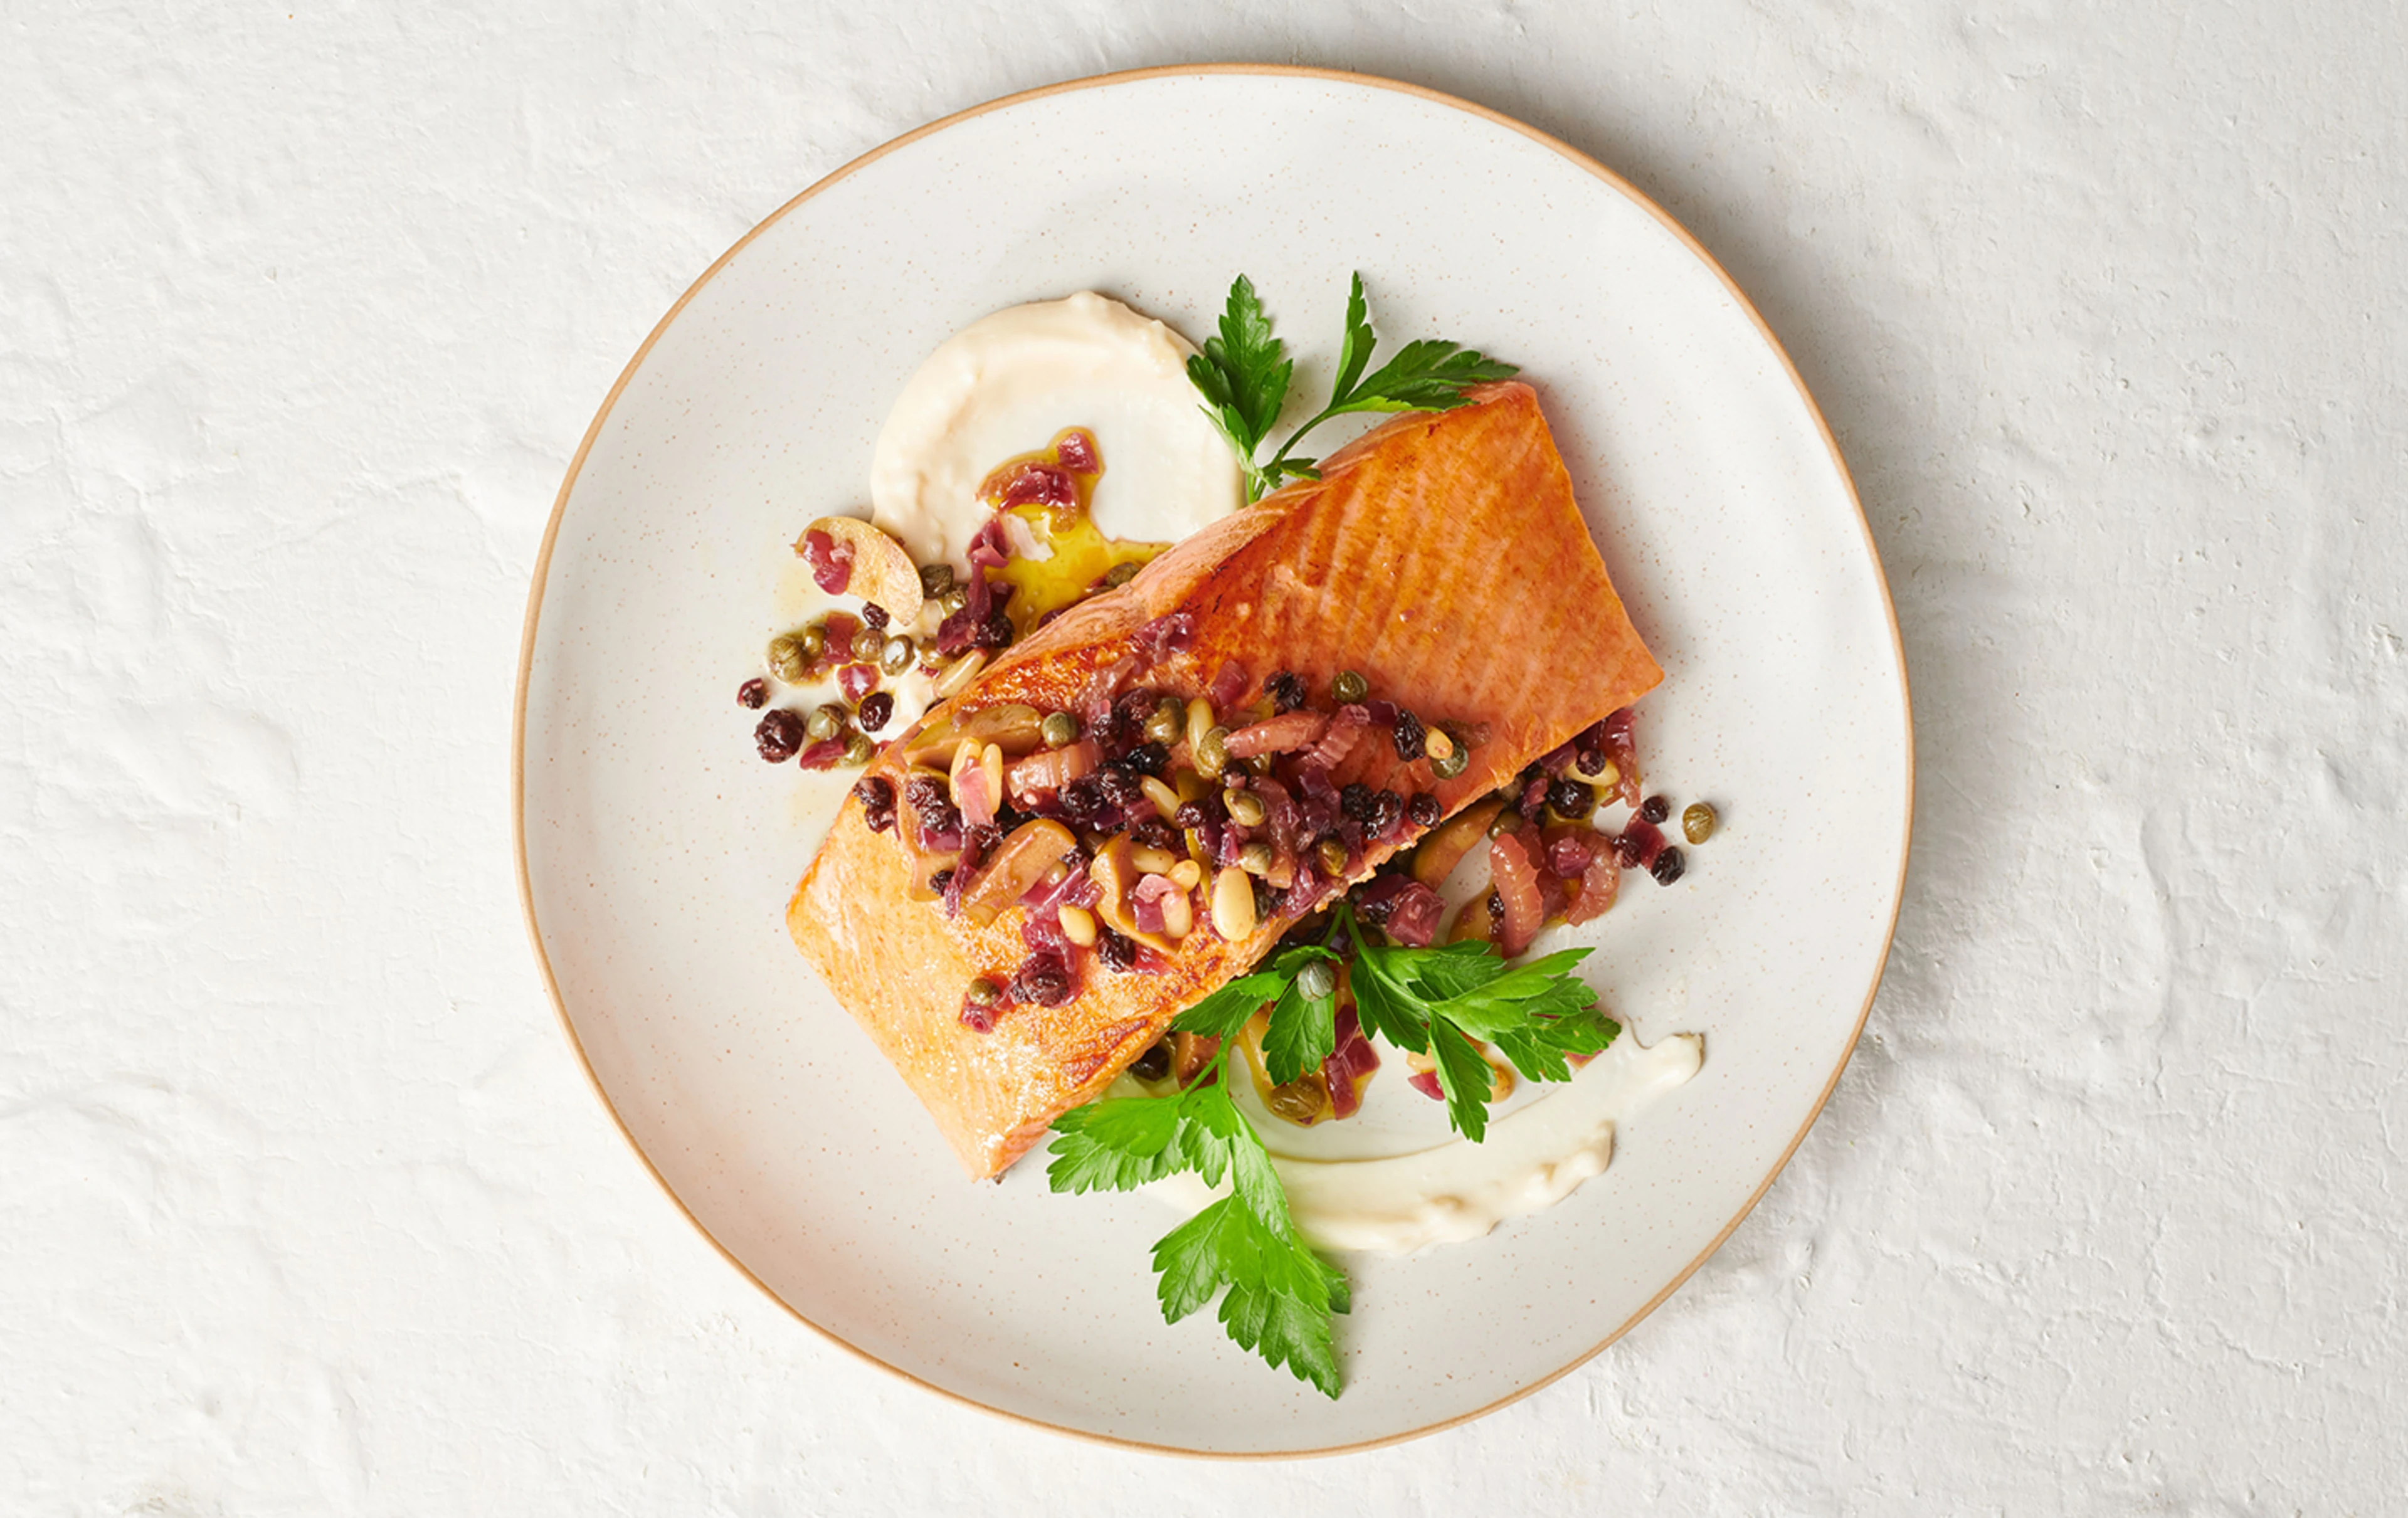 Big Glory Bay King Salmon with a sicilian olive pine nut and caper relish